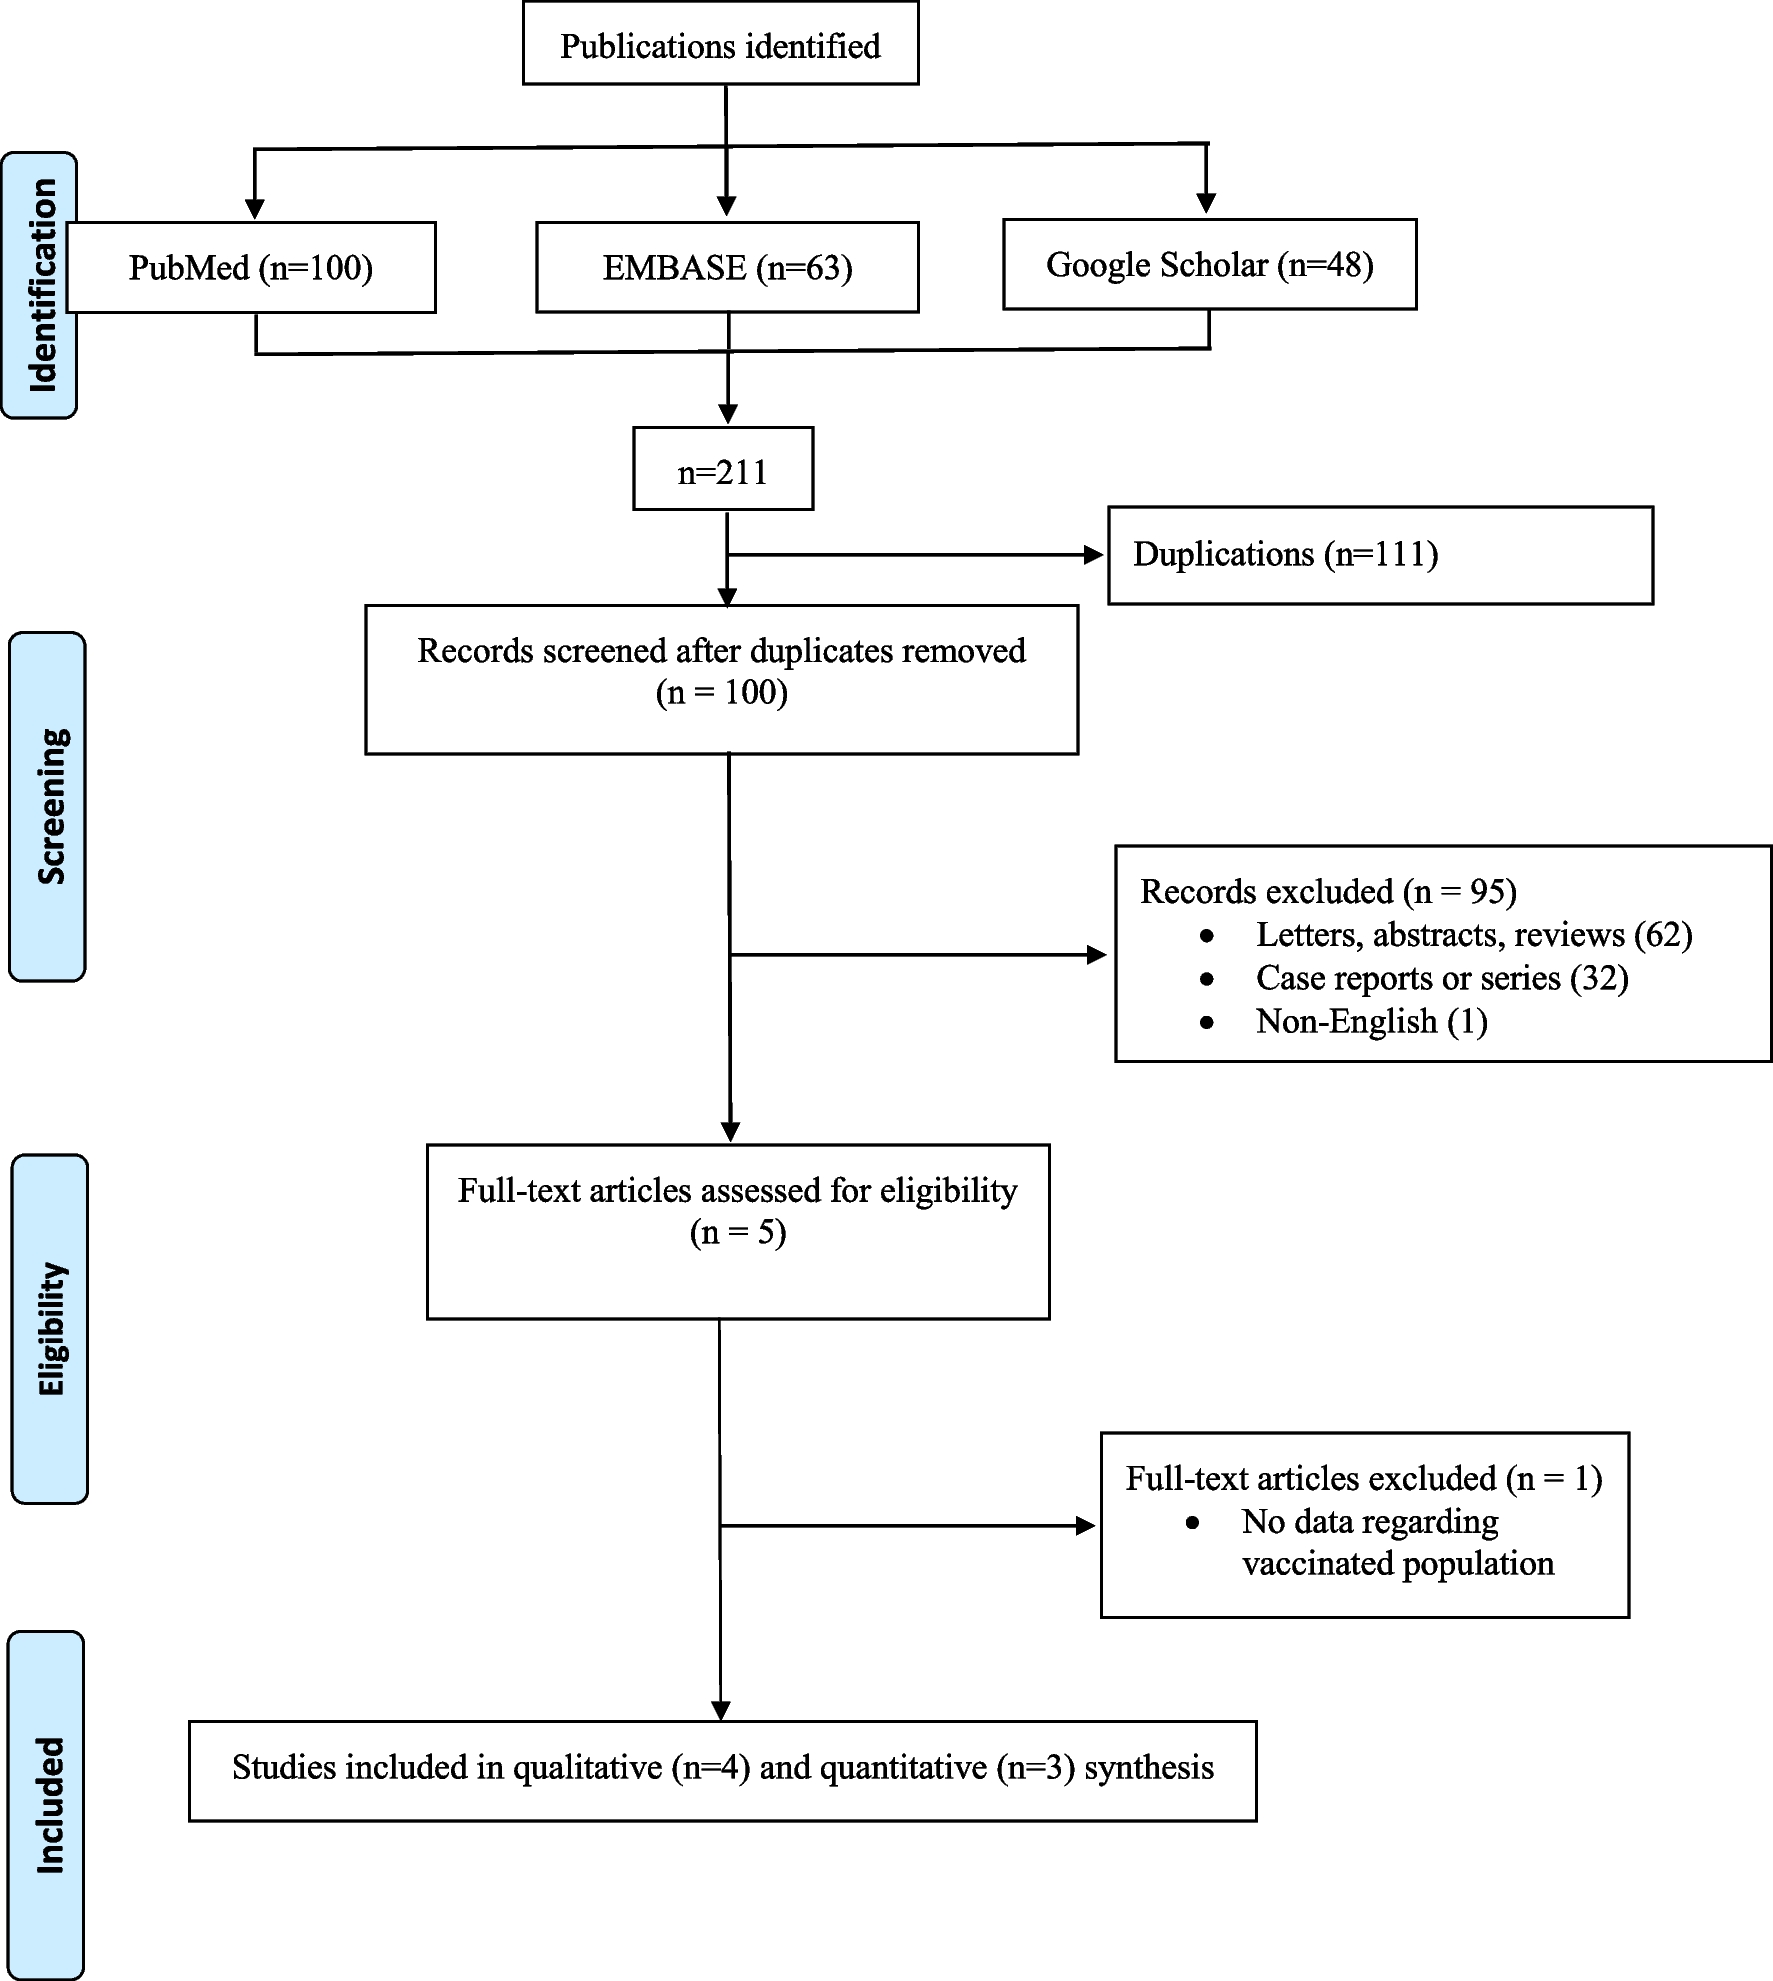 Idiopathic sudden sensorineural hearing loss after COVID-19 vaccination: a systematic review and meta-analysis